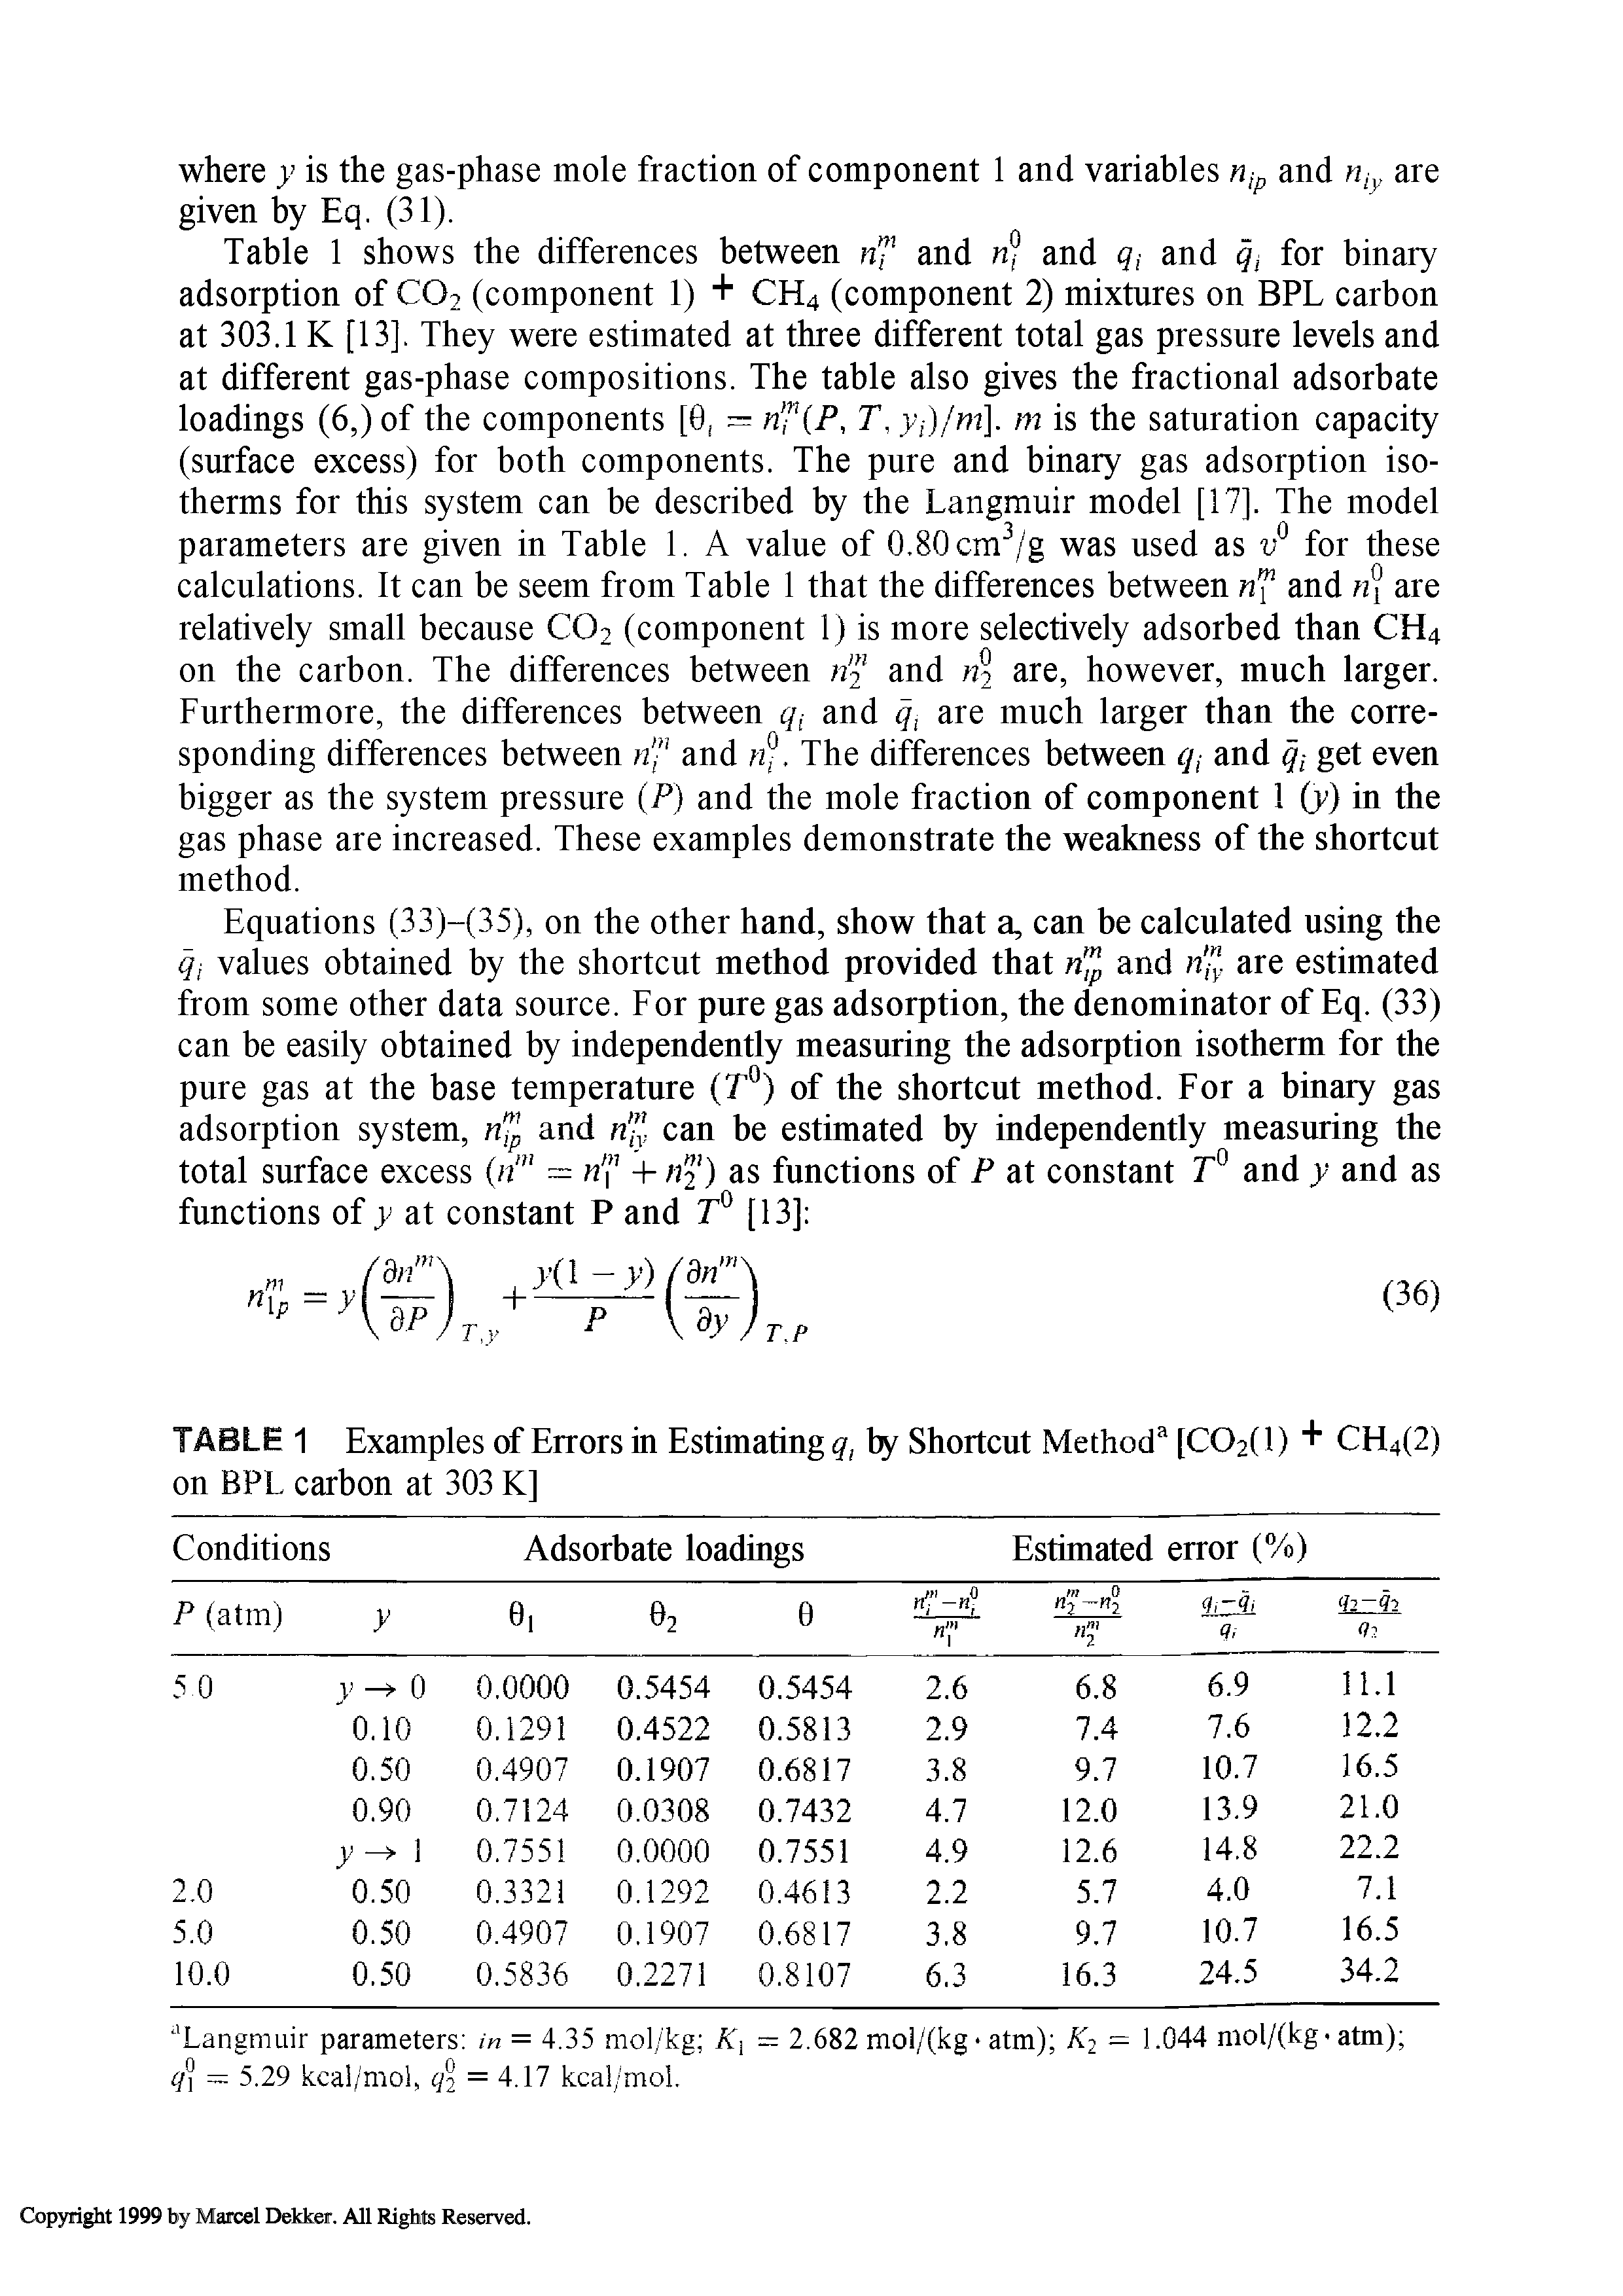 Table 1 shows the differences between nf and n and 9, and for binary adsorption of CO2 (component 1) + CH4 (component 2) mixtures on BPL carbon at soil K [13]. They were estimated at three different total gas pressure levels and at different gas-phase compositions. The table also gives the fractional adsorbate loadings (6,) of the components [0 — nT(P, T, y,)/w]. m is the saturation capacity (surface excess) for both components. The pure and binary gas adsorption isotherms for this system can be described by the Langmuir model [17]. The model parameters are given in Table 1. A value of 0.80cm /g was used as for these calculations. It can be seem from Table 1 that the differences between nf and are relatively small because CO2 (component 1) is more selectively adsorbed than CH4 on the carbon. The differences between n and 2 are, however, much larger. Furthermore, the differences between qi and q, are much larger than the corresponding differences between and. The differences between qi and qi get even bigger as the system pressure P) and the mole fraction of component 1 (y) in the gas phase are increased. These examples demonstrate the weakness of the shortcut method.